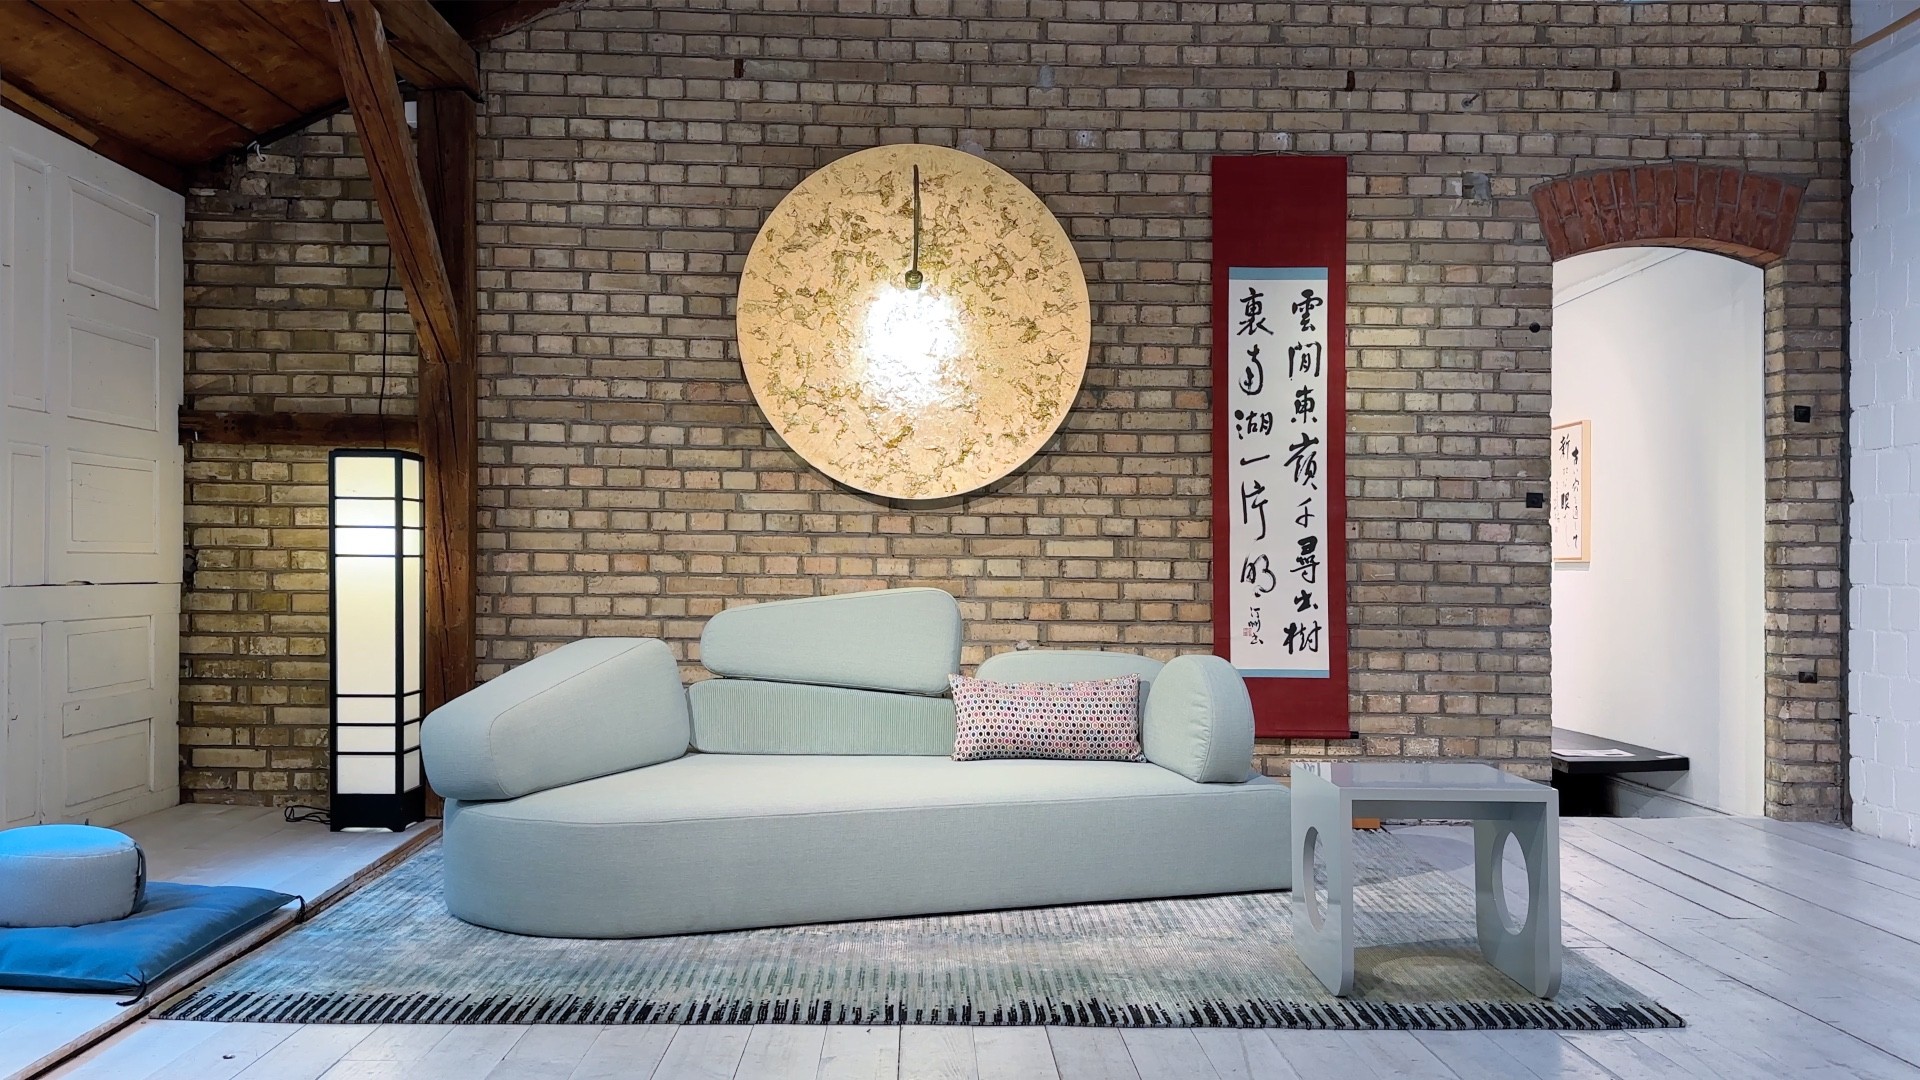 Sofas by Brühl for the European-Japanese world of Sato